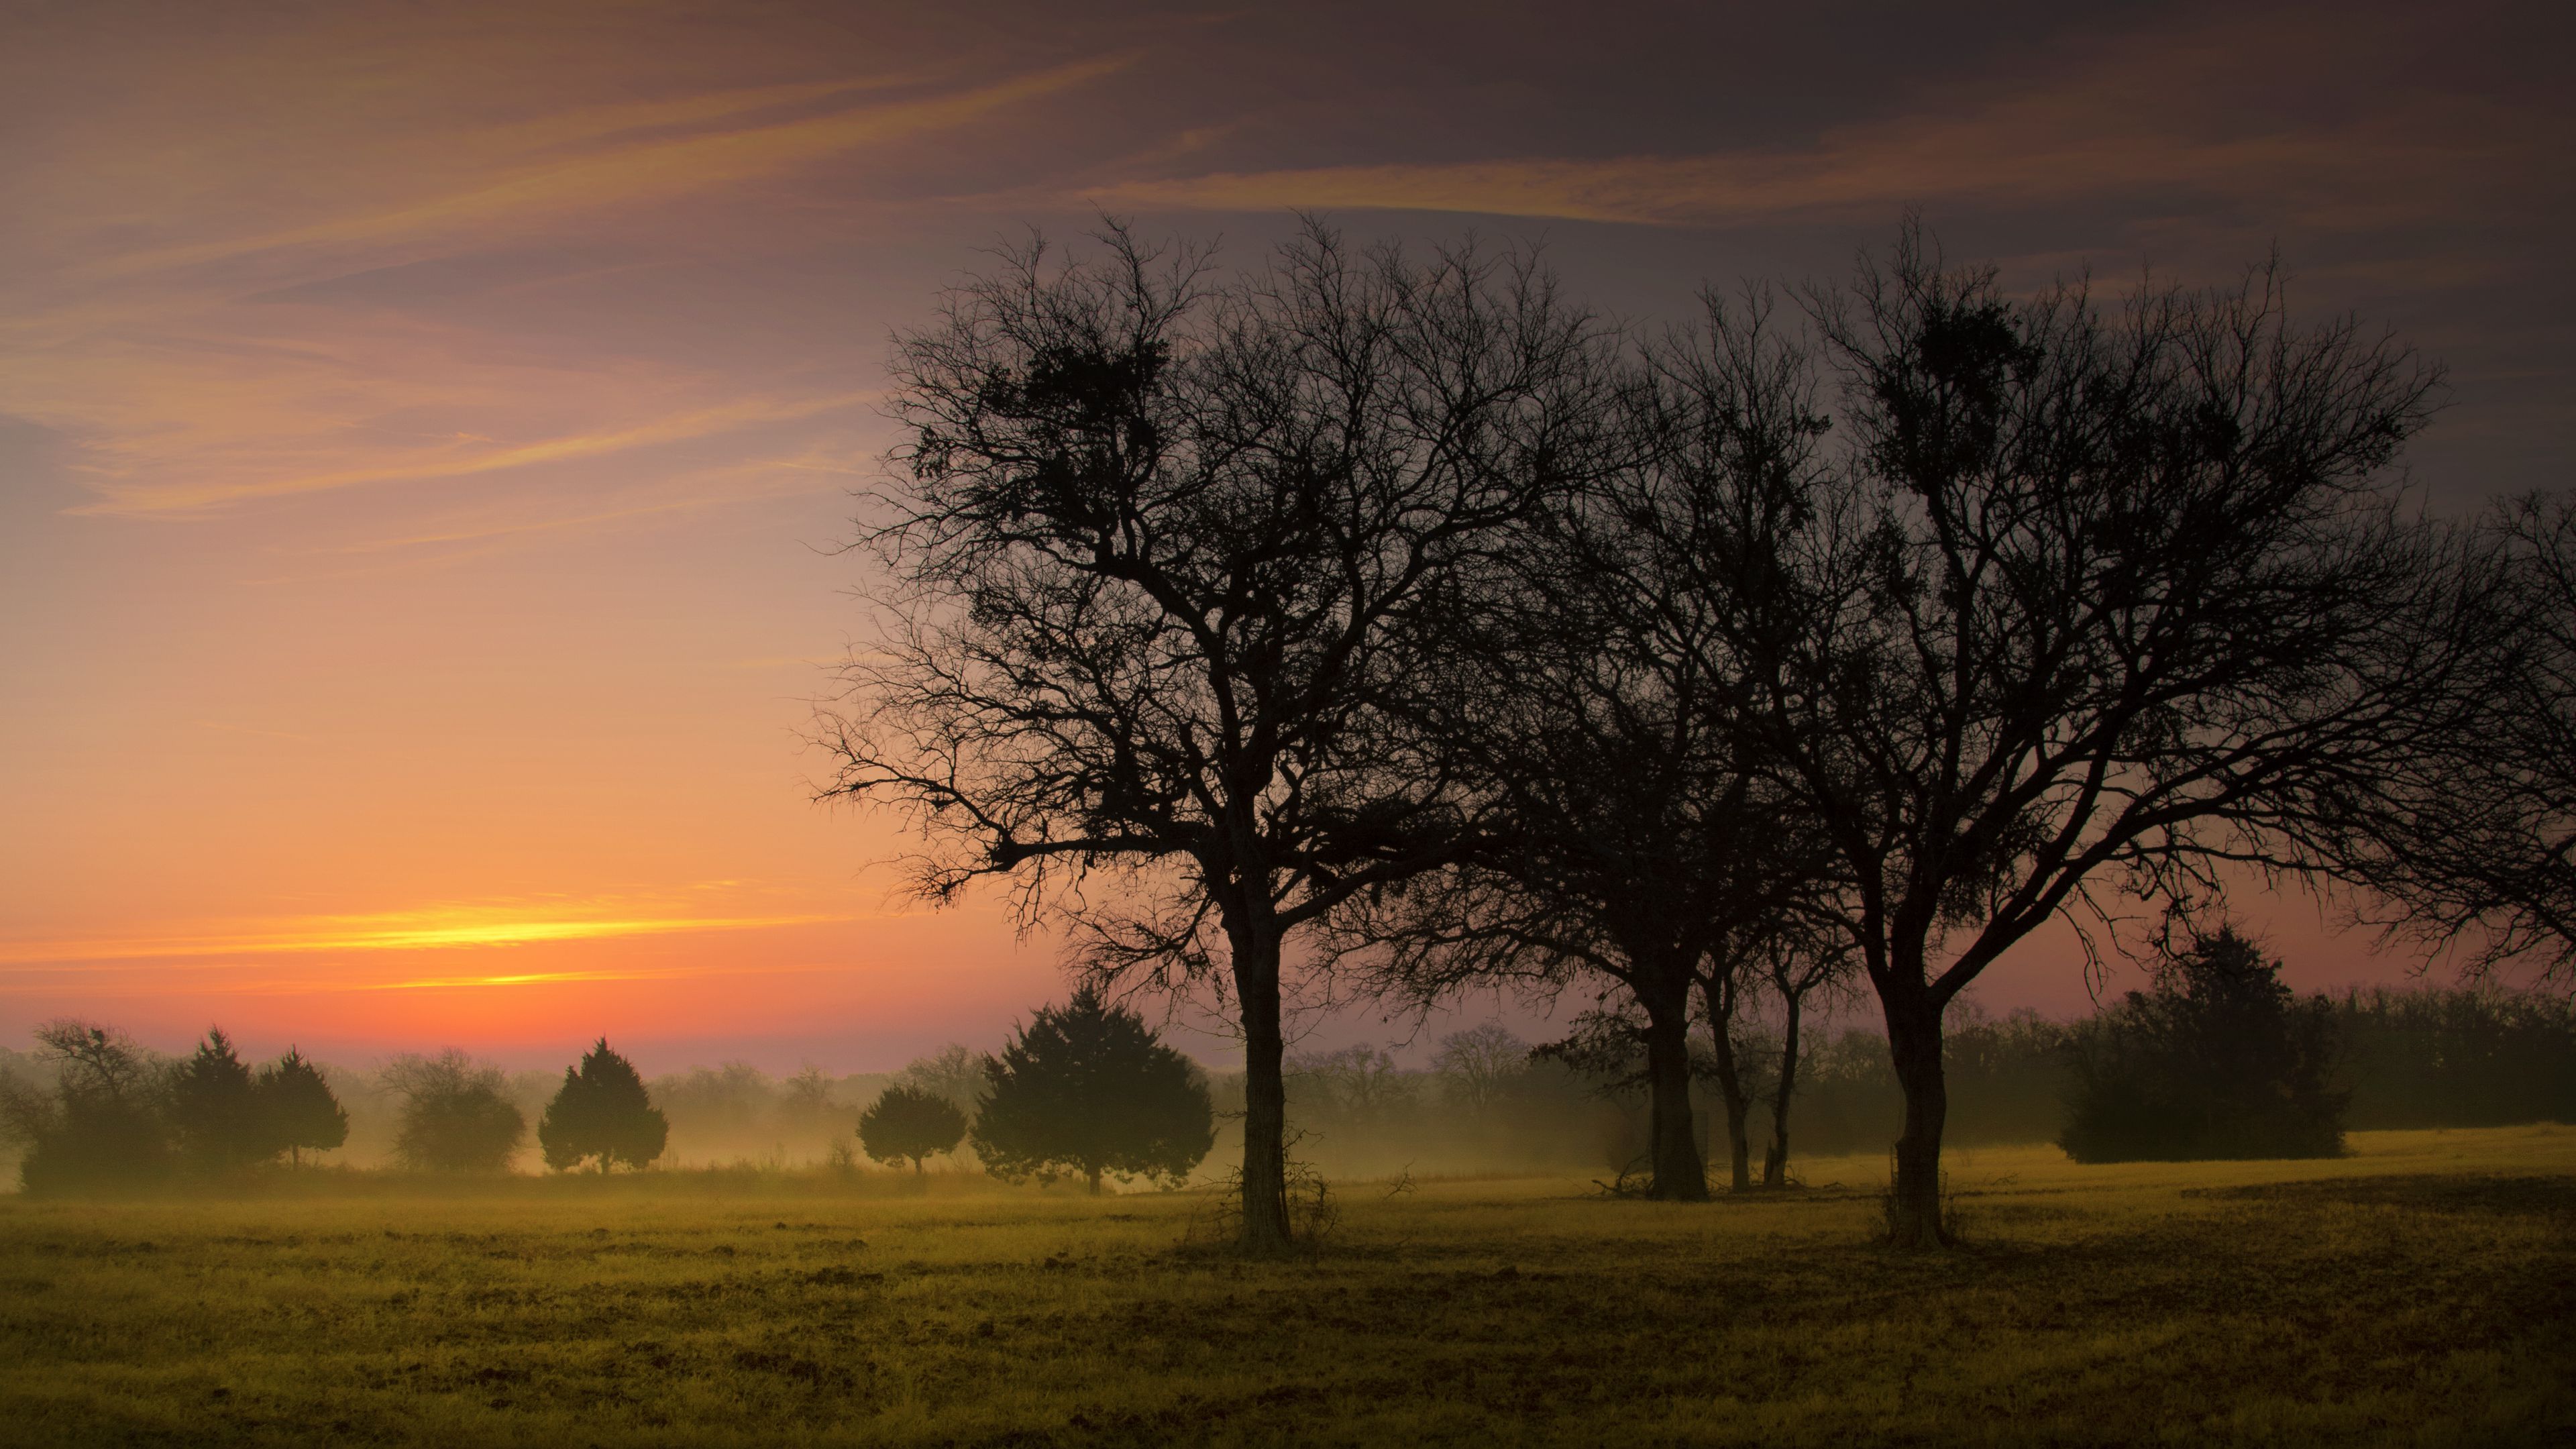 Download wallpaper 3840x2160 morning, sky, trees, dawn, early, fog 4k uhd 16:9 HD background